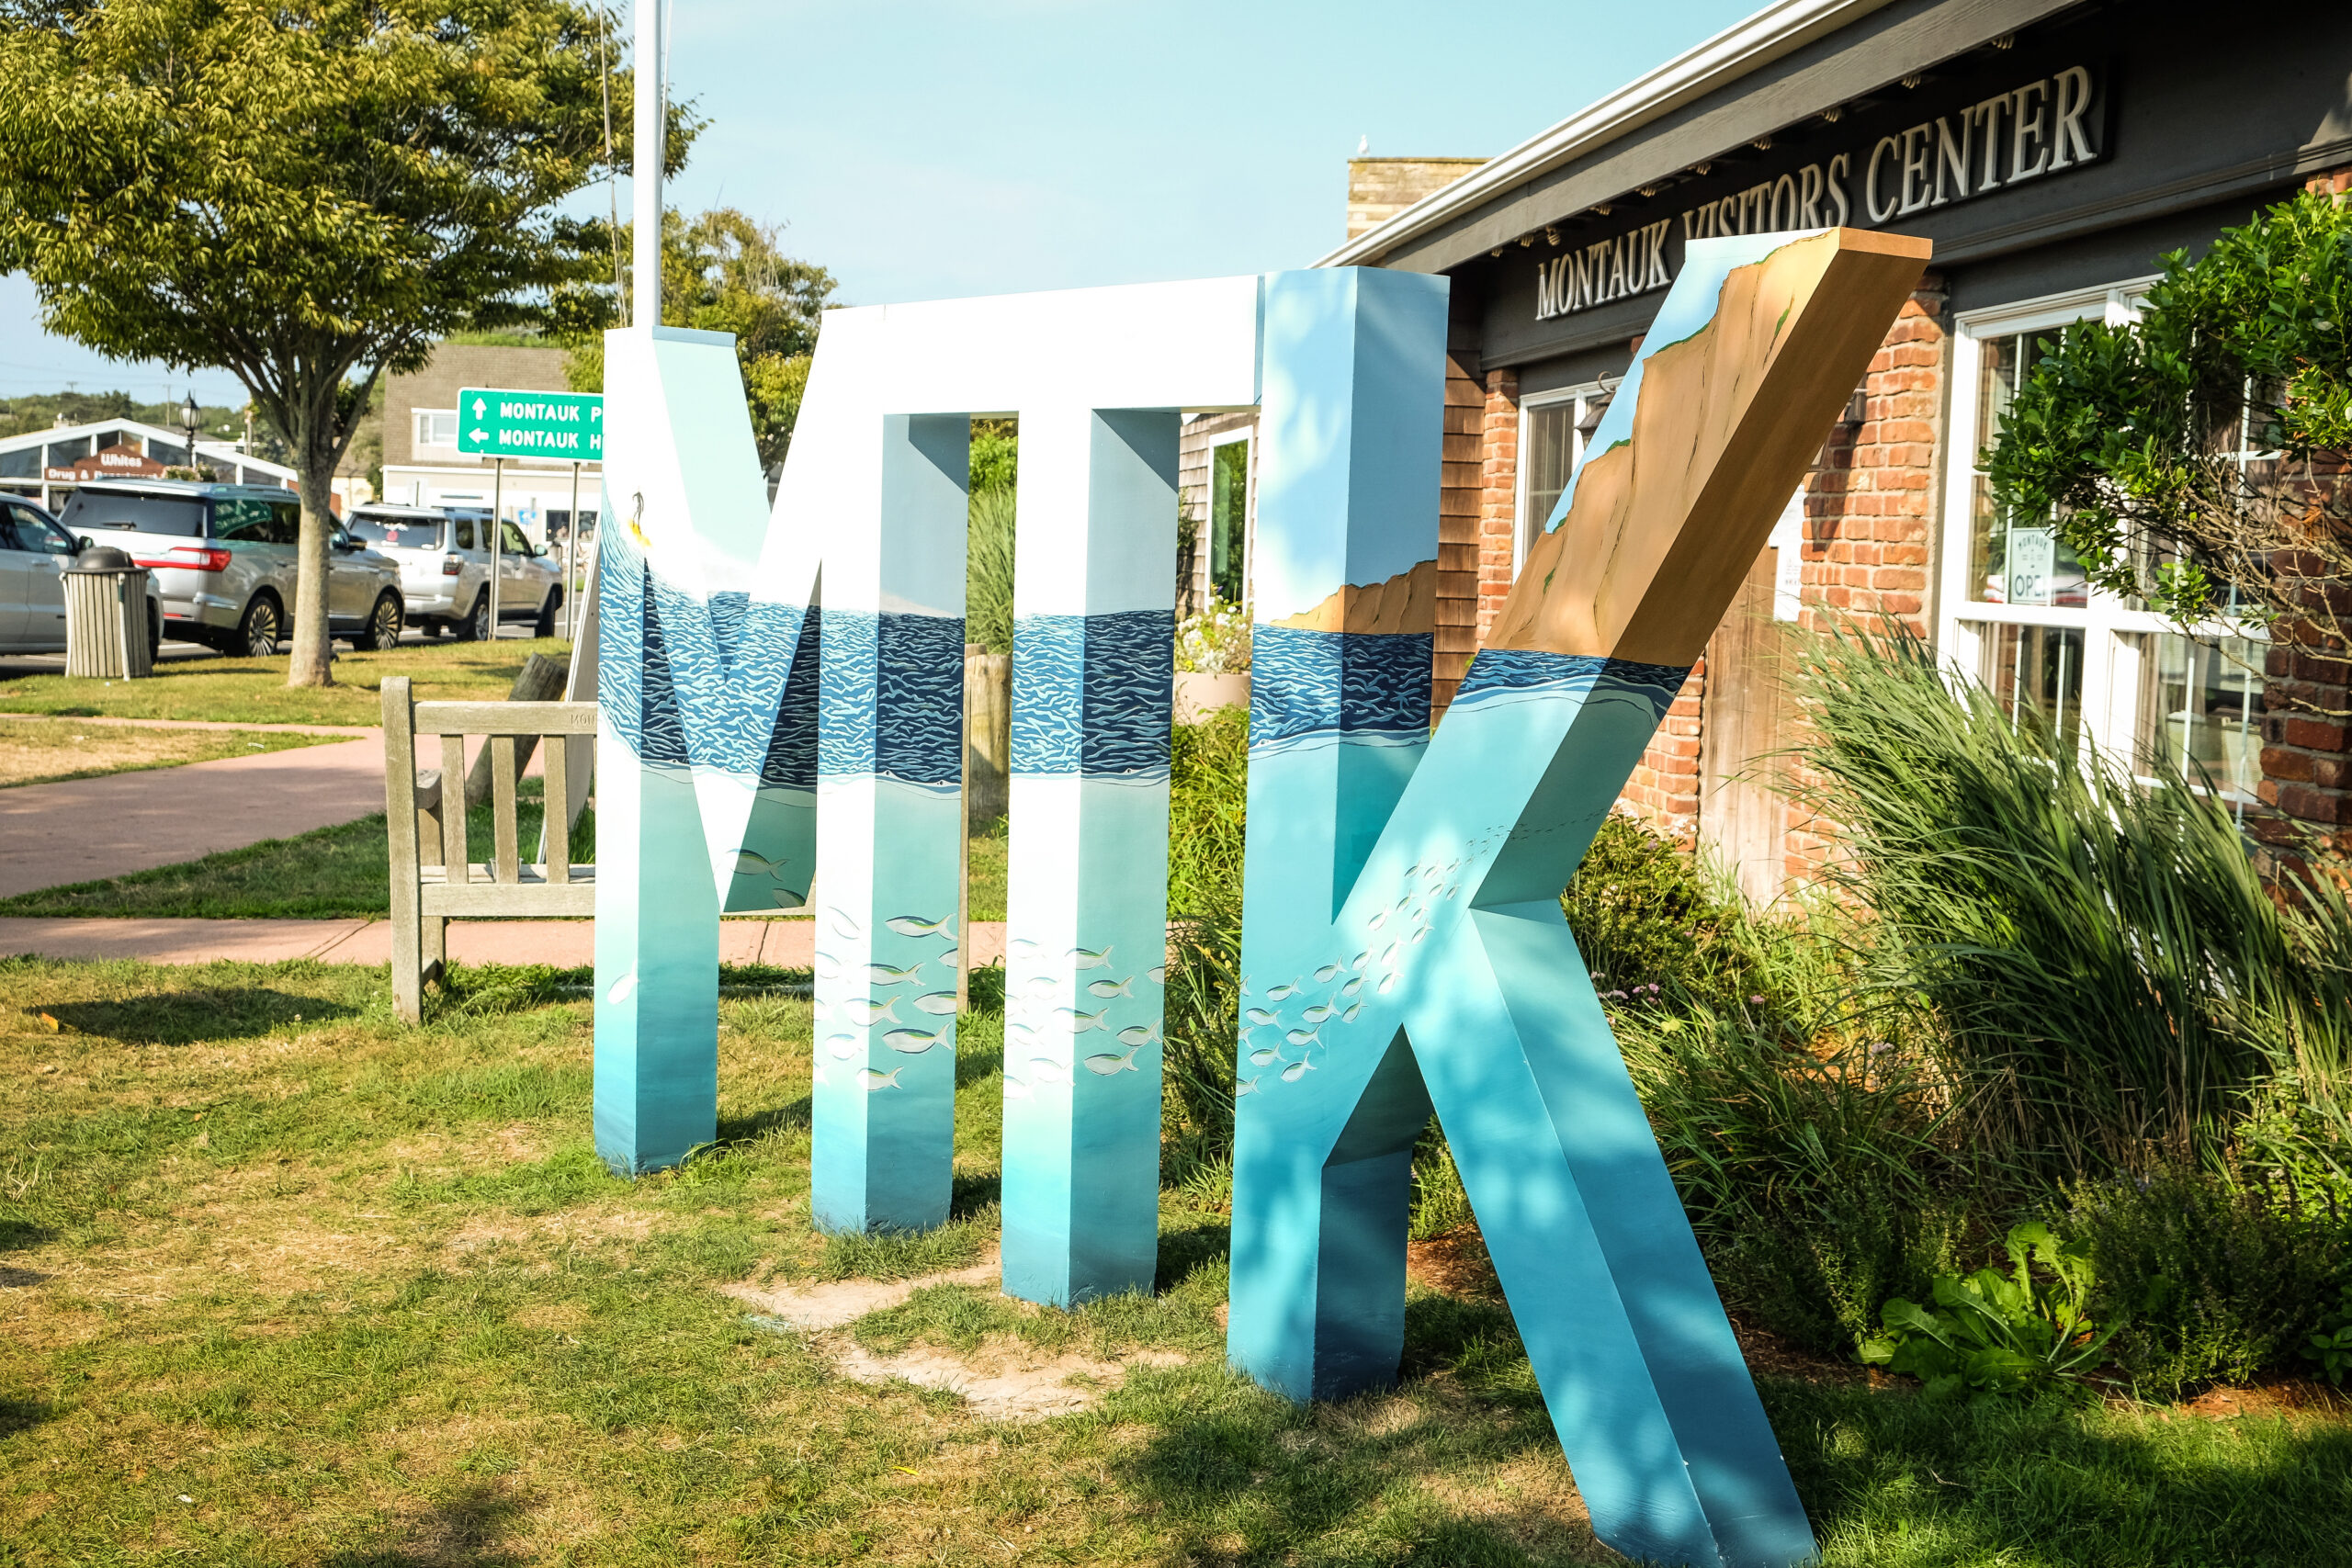 The completed MTK letters painted by artist Kylie Ogburn in front of the Montauk Chamber of Commerce visitor center. IAN COOKE/COURTESY MONTAUK CHAMBER OF COMMERCE